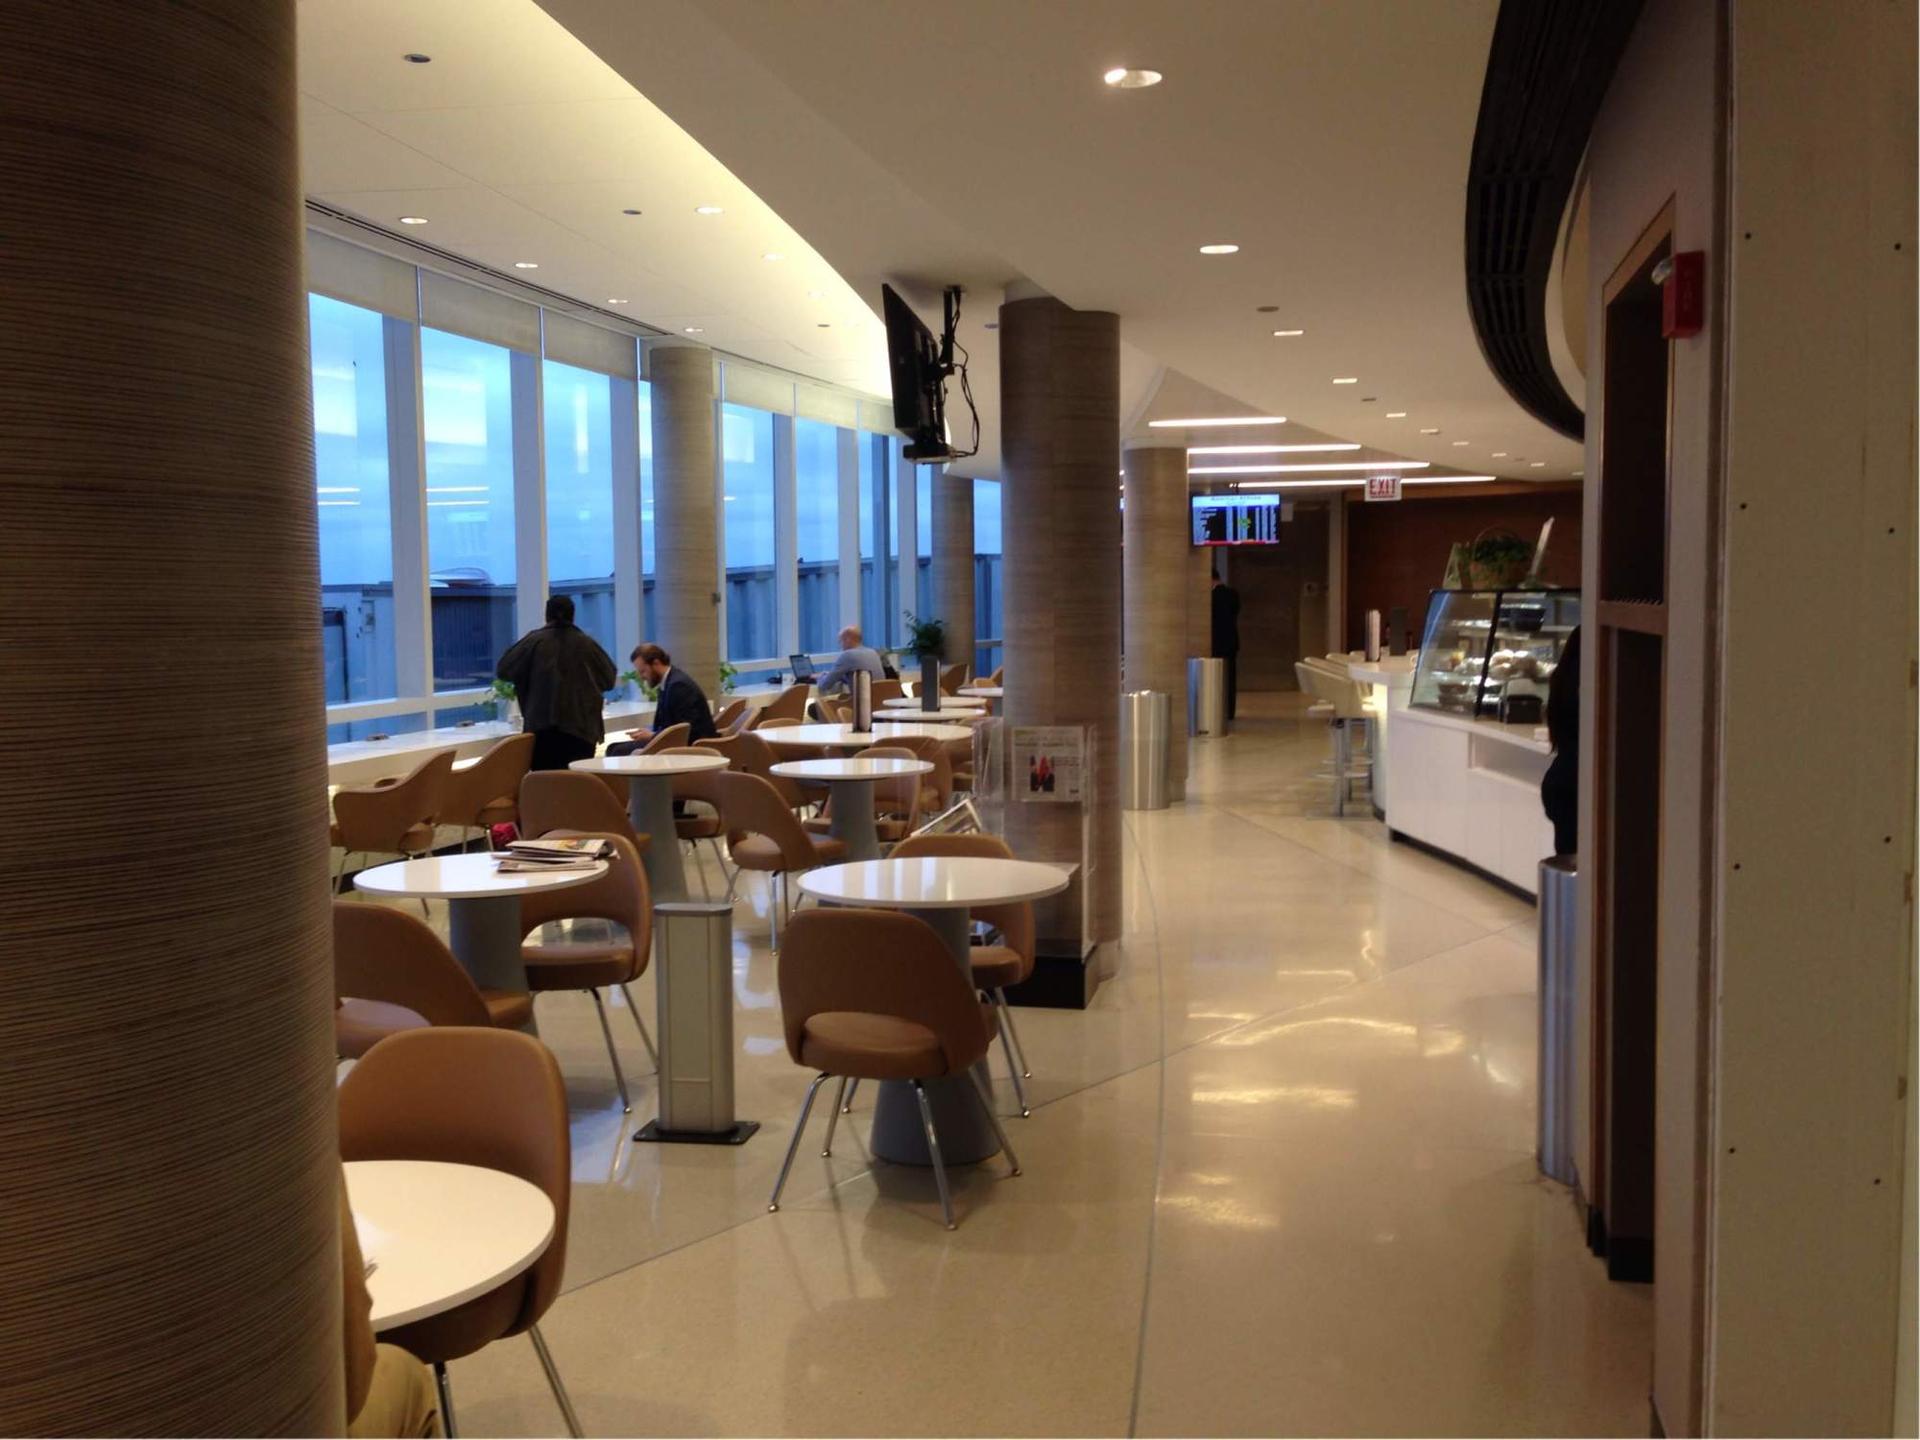 American Airlines Admirals Club image 13 of 50